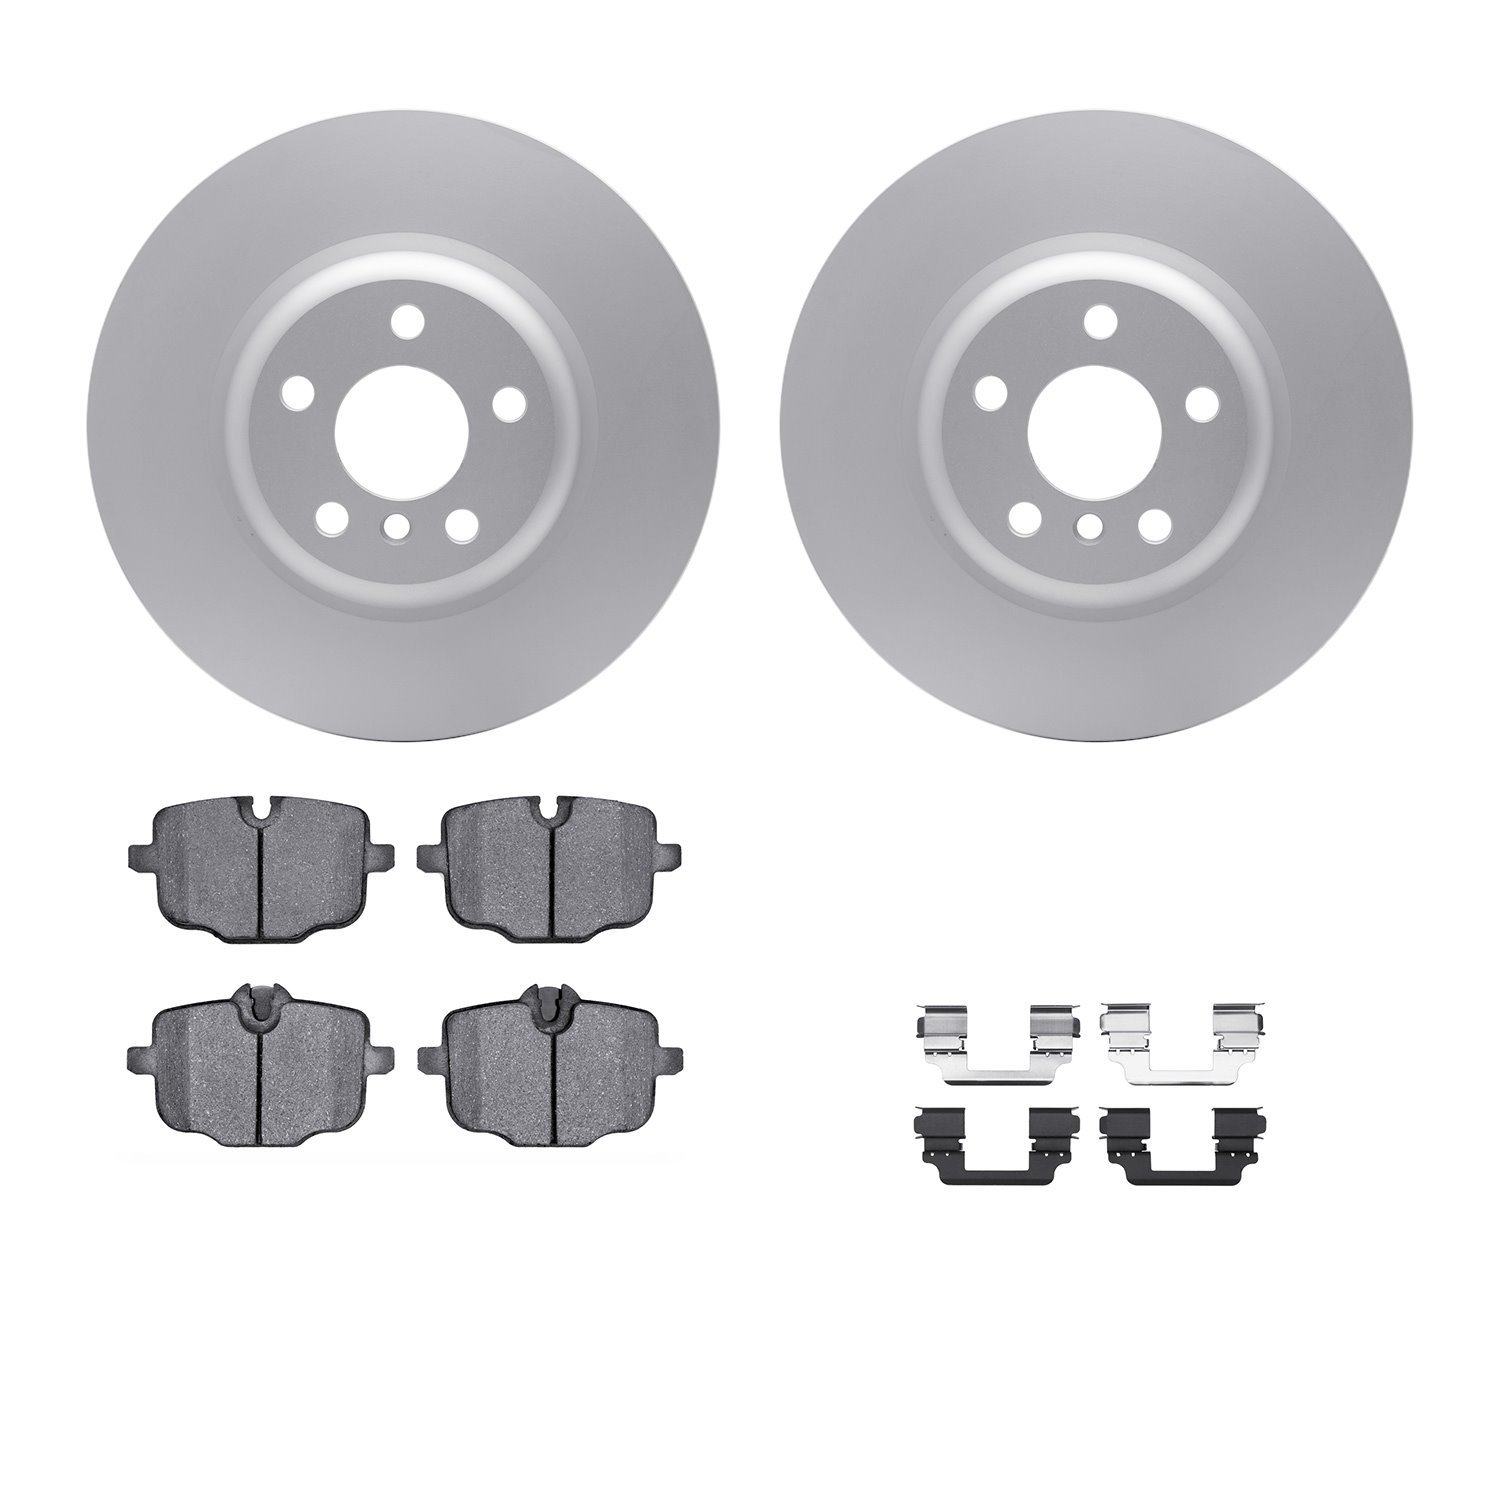 4312-31092 Geospec Brake Rotors with 3000-Series Ceramic Brake Pads & Hardware, Fits Select BMW, Position: Rear